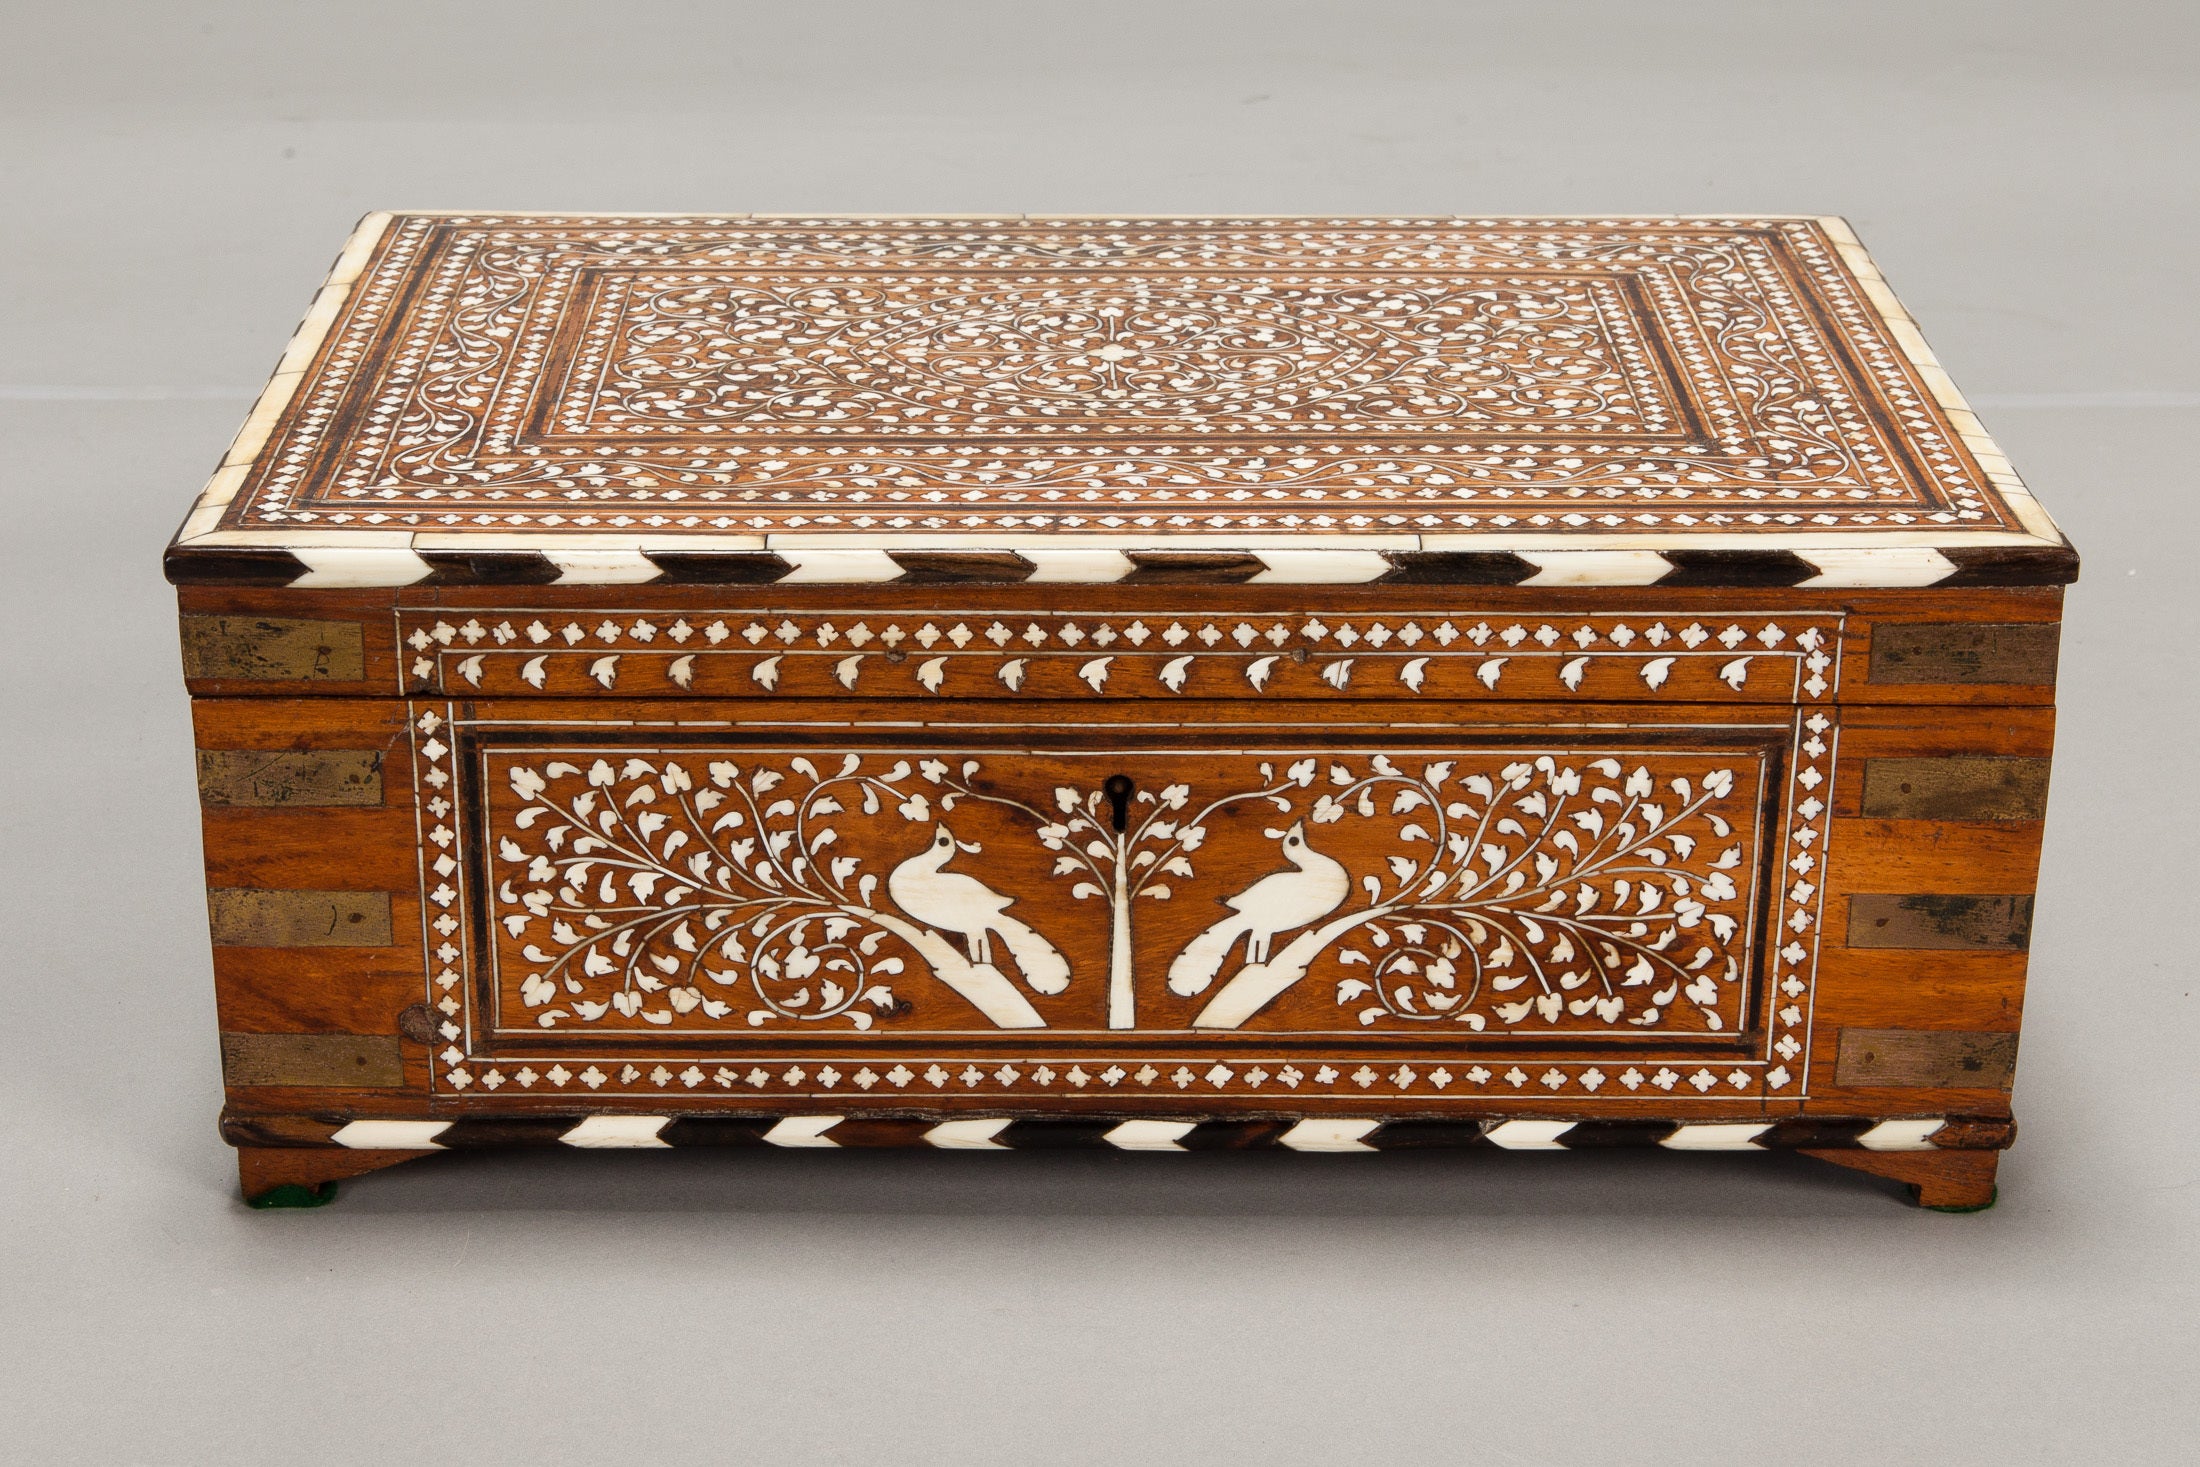 19th Century Anglo Indian Writing Box with Bone Inlay